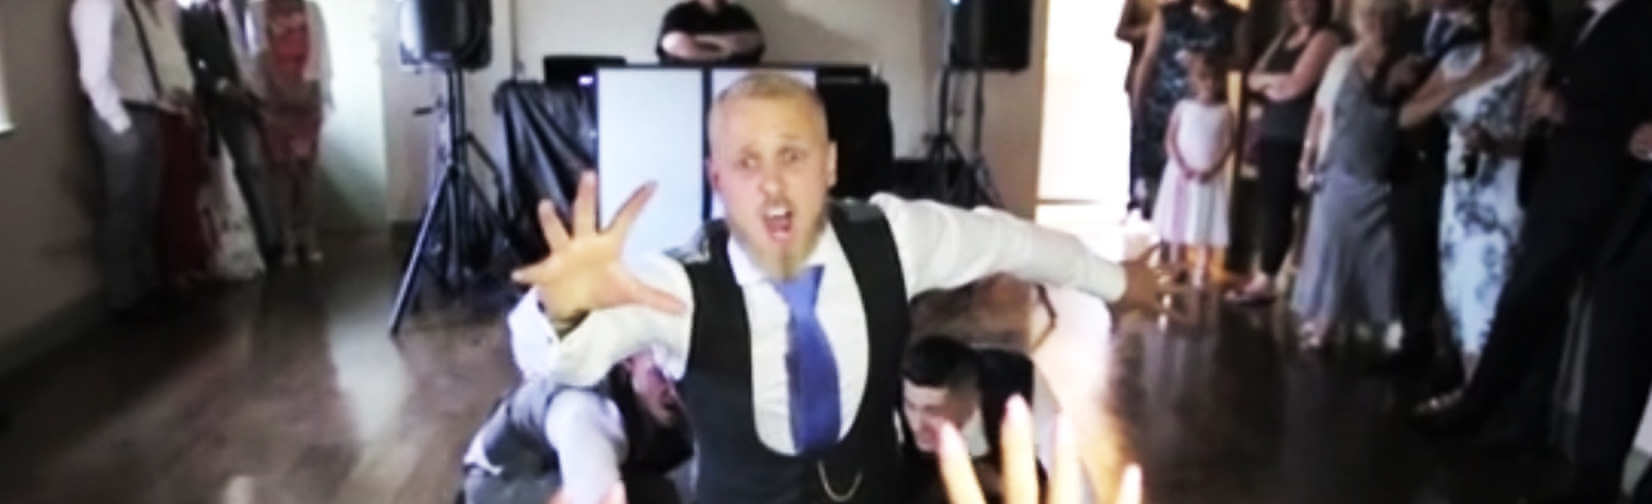 Bride had no idea what was going on the Groomsmen led her to a seat.